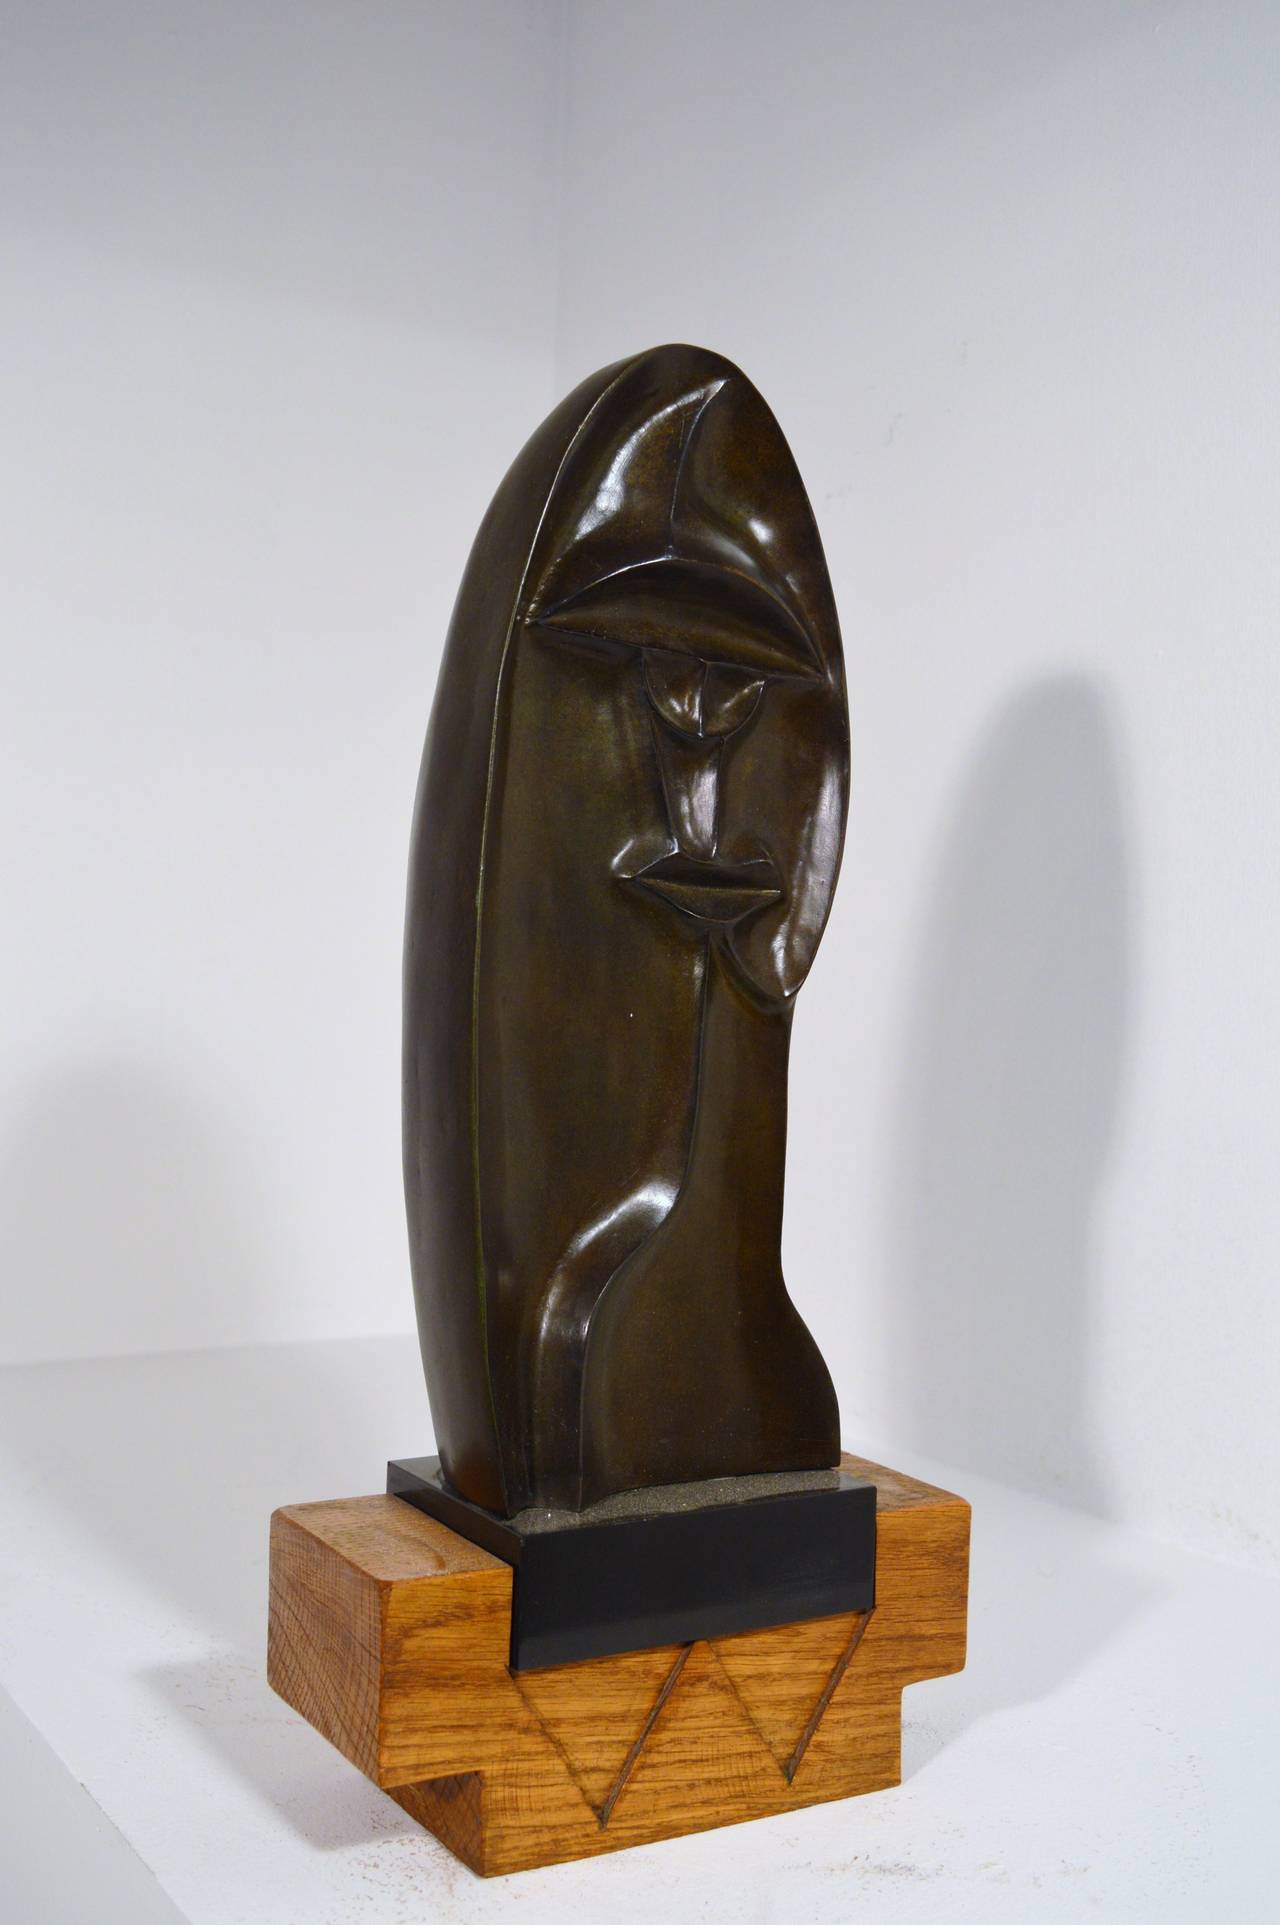 Brown and green patinated sculpture in bronze, created in France by Daniel Ghiatza, dated 1973.